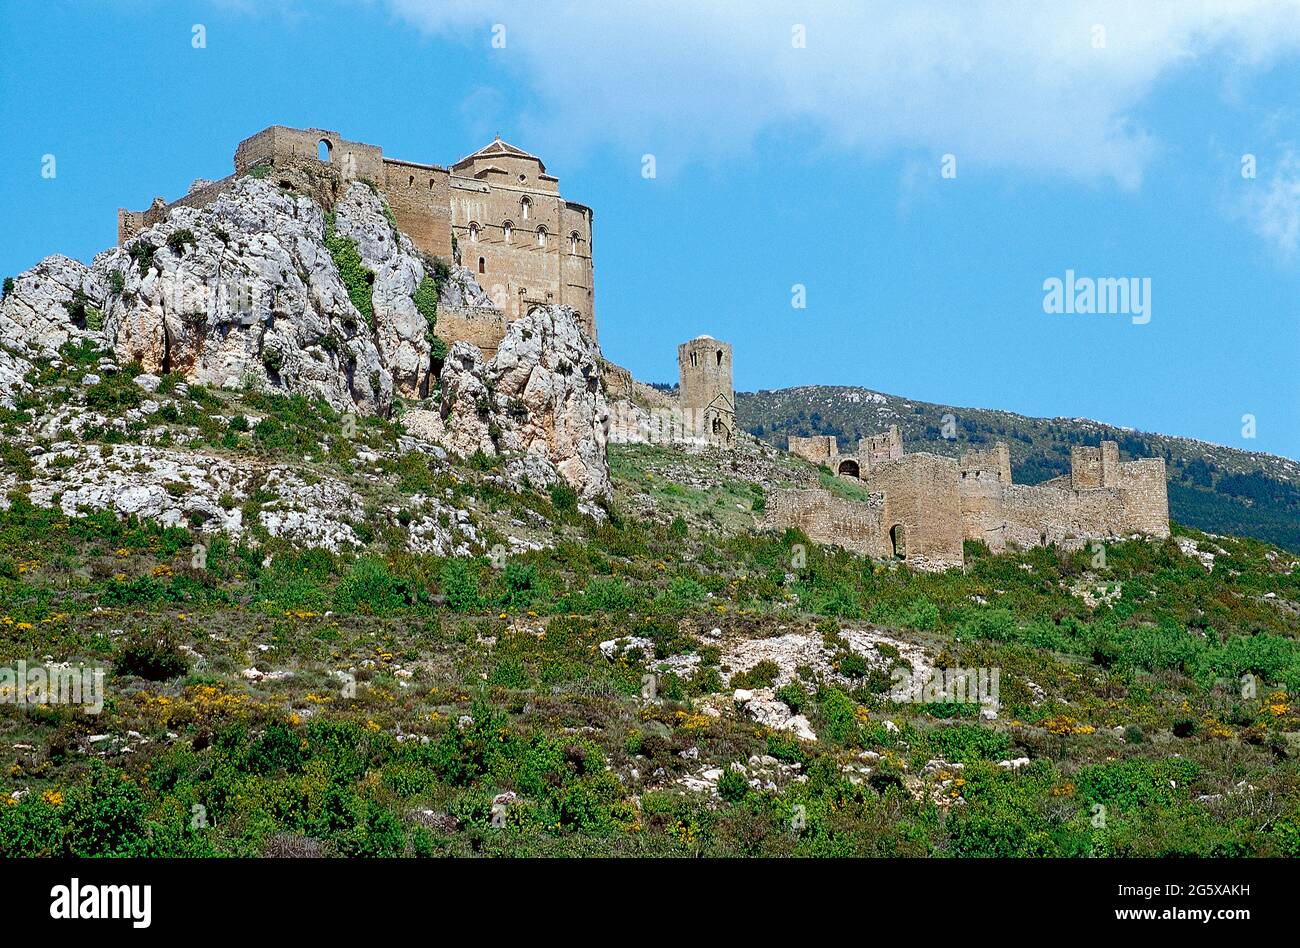 Spain, Aragón, Huesca province, Loarre. View of the castle, founded by King Sancho III the Great. At the end of the 11th century, King Sancho I Ramírez of Aragon (1043-1094) enlarged the castle enclosure. Stock Photo